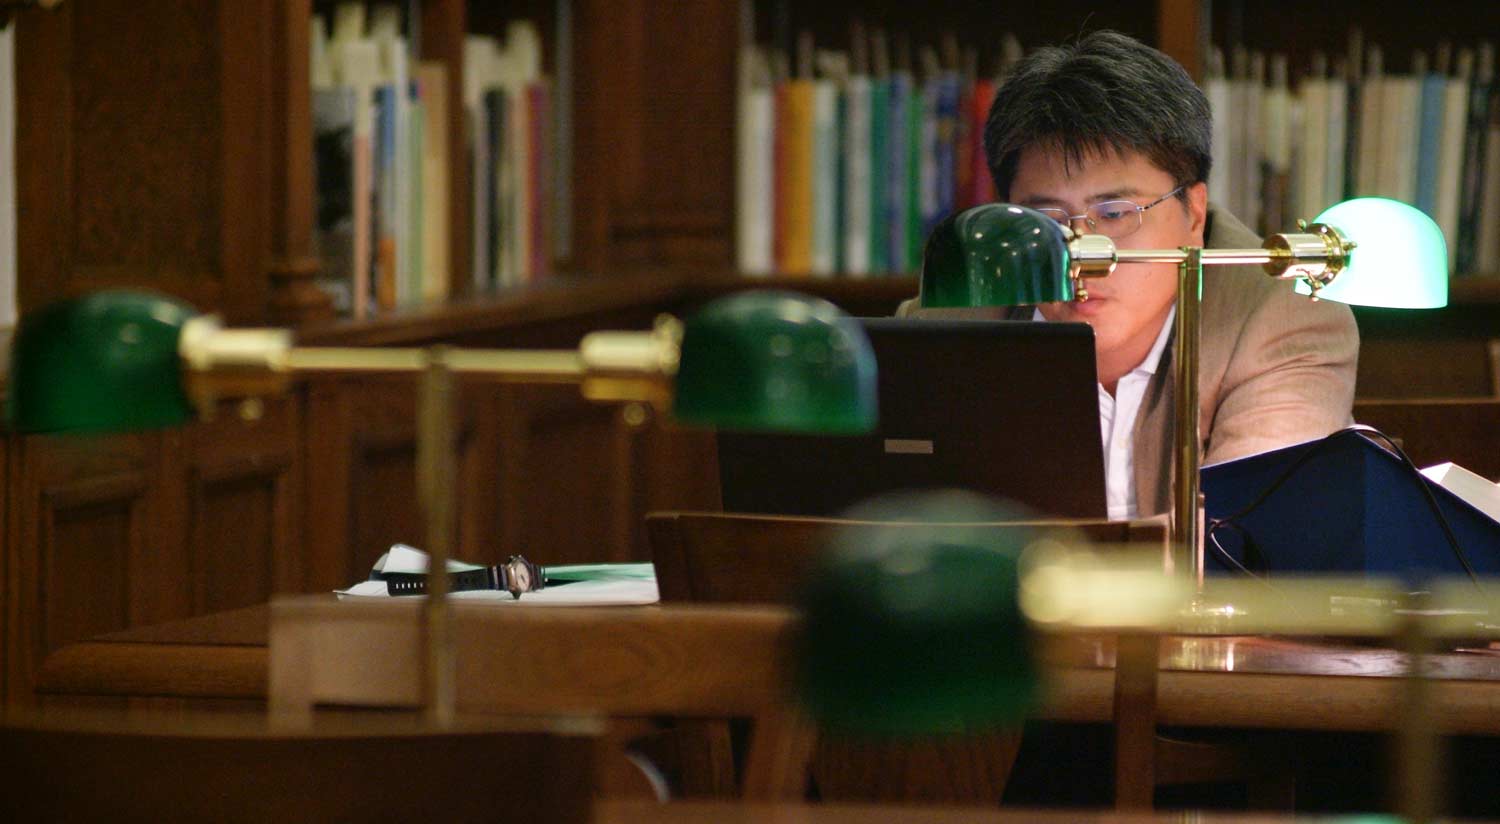 A student on their laptop in Cushing Library